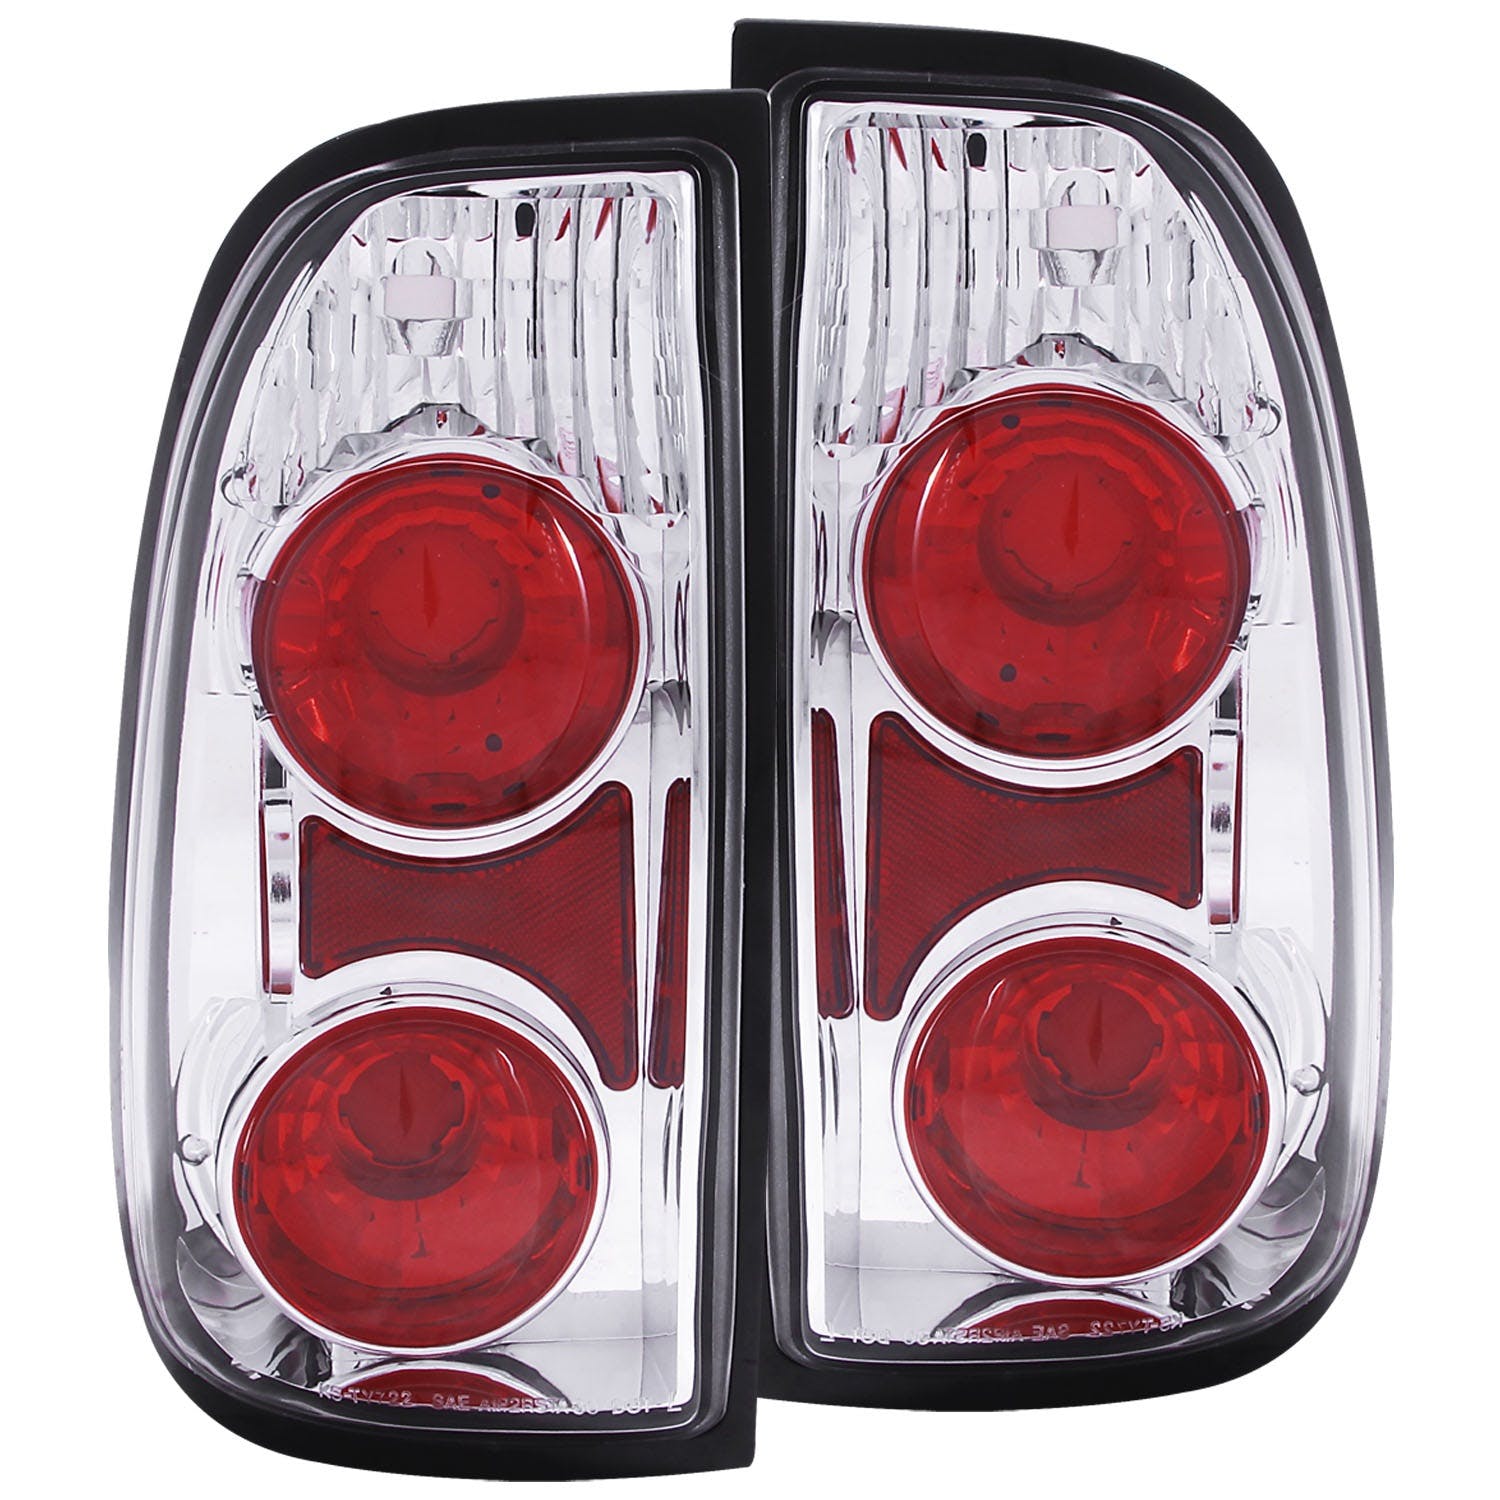 AnzoUSA 211125 Taillights Chrome